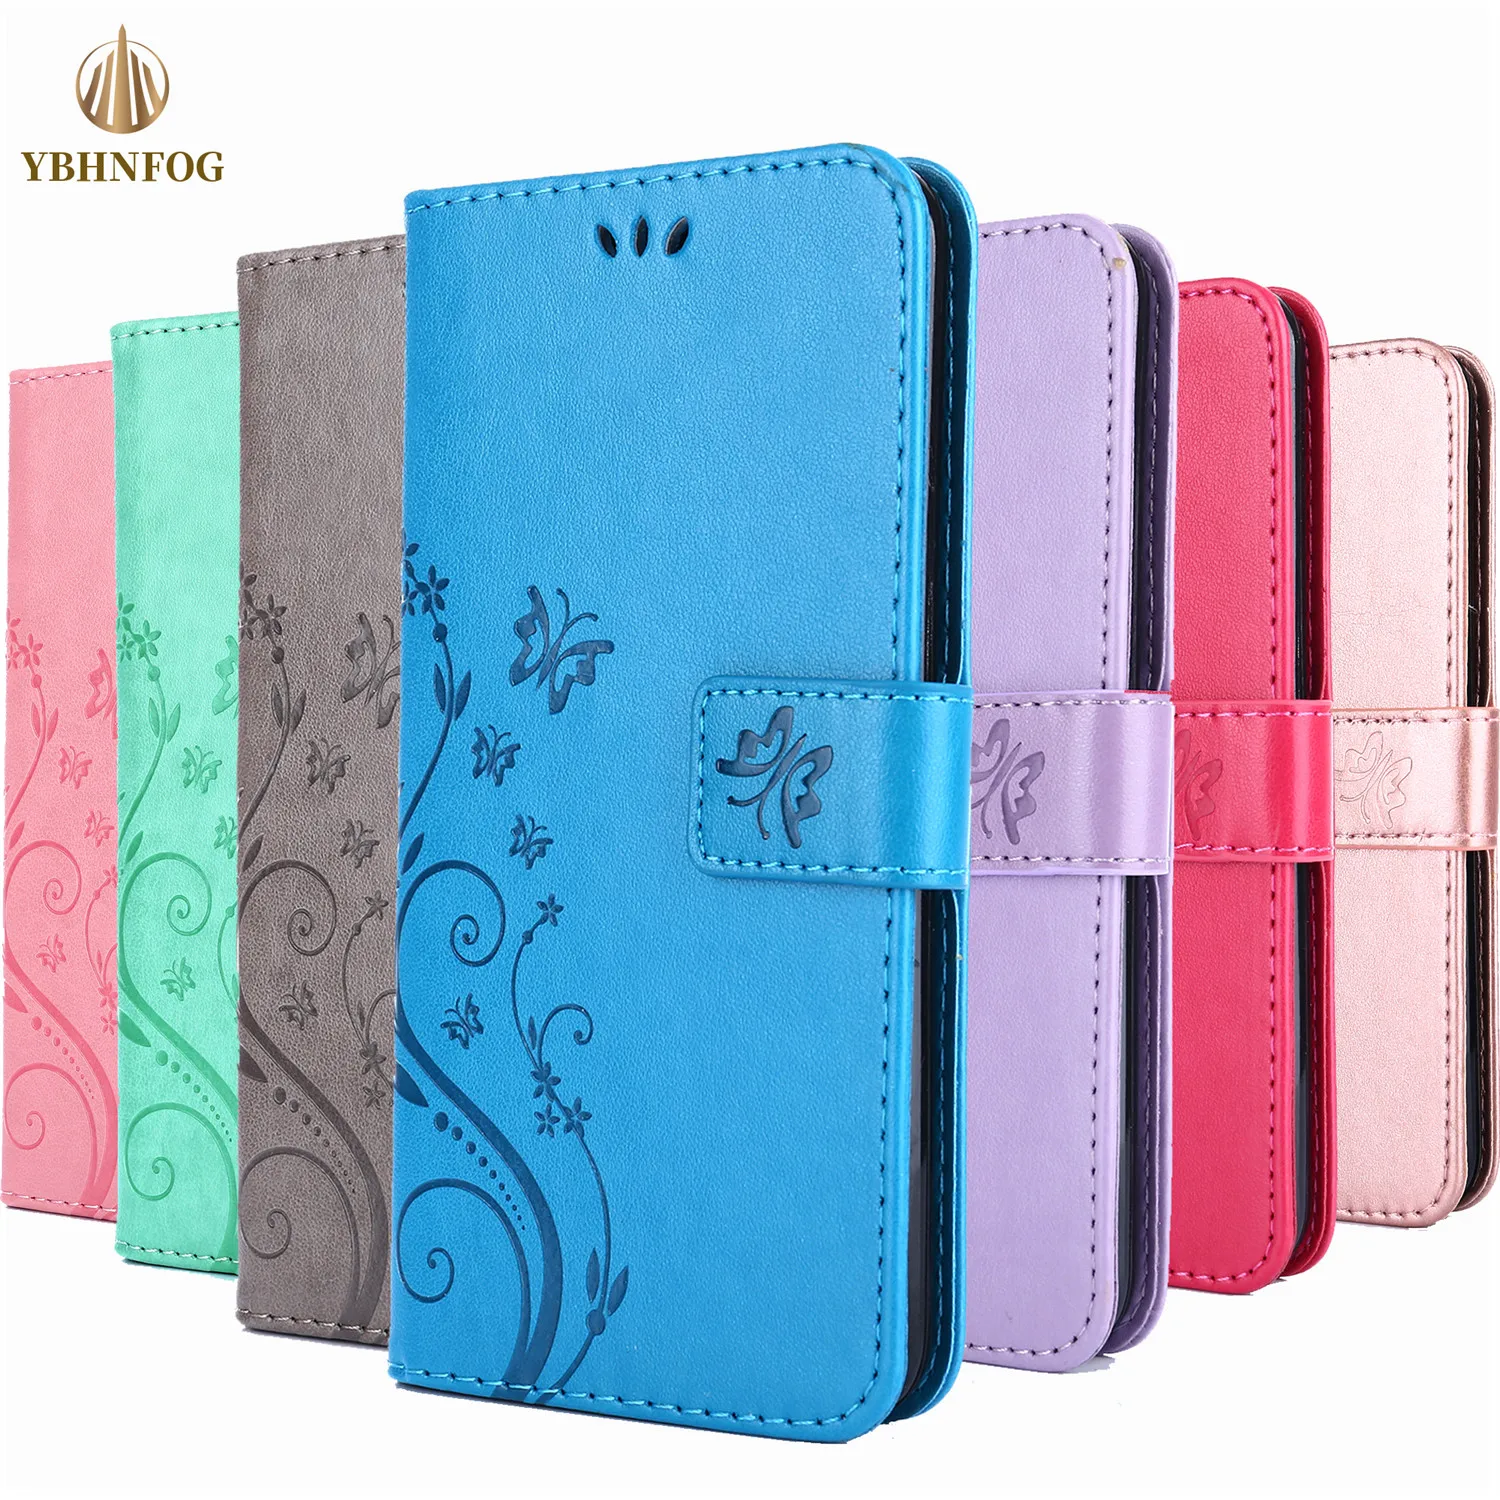 

PU Leather Flip Wallet Case For Samsung Galaxy A50 A40 A30 A20 A10 J3 J5 2017 Note 10 Plus Note 20 Ultra Stand Phone Cover Coque